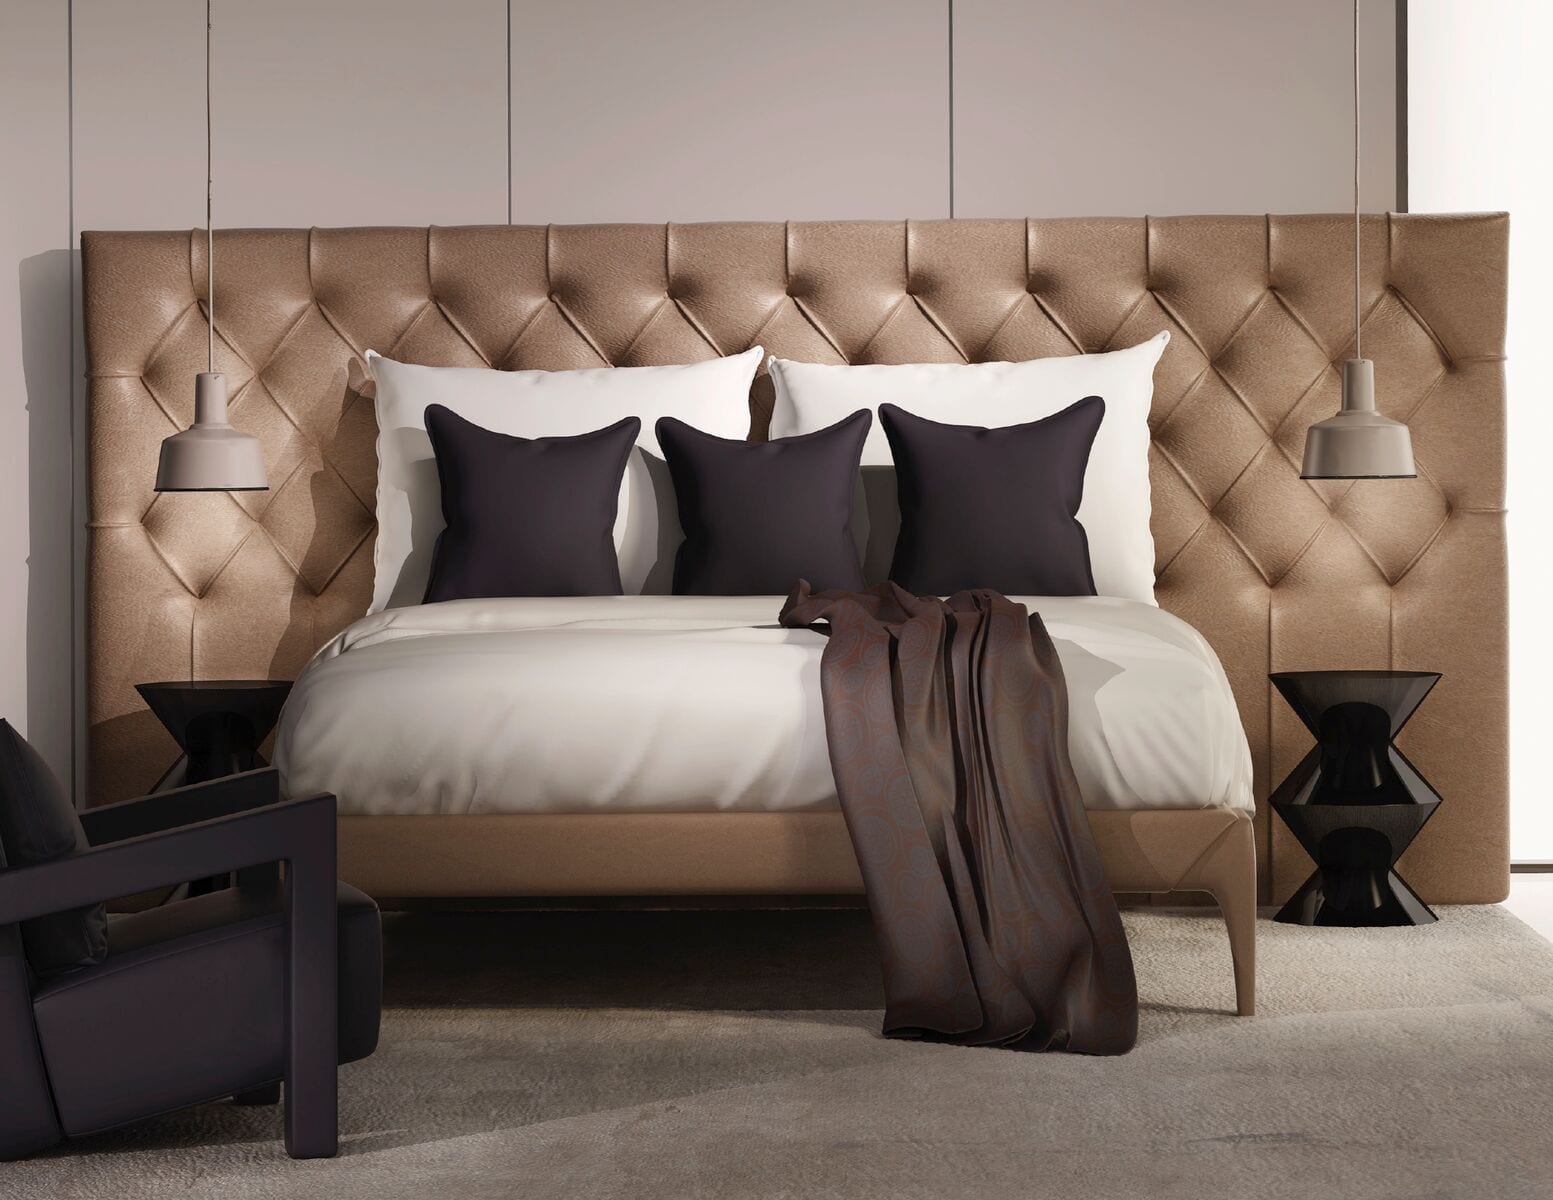 Dream - Wall mounted upholstered, luxury headboard with custom upholstered wall panels - Custom luxury, upholstered beds with high end, bedroom textiles | Blend Home Furnishings